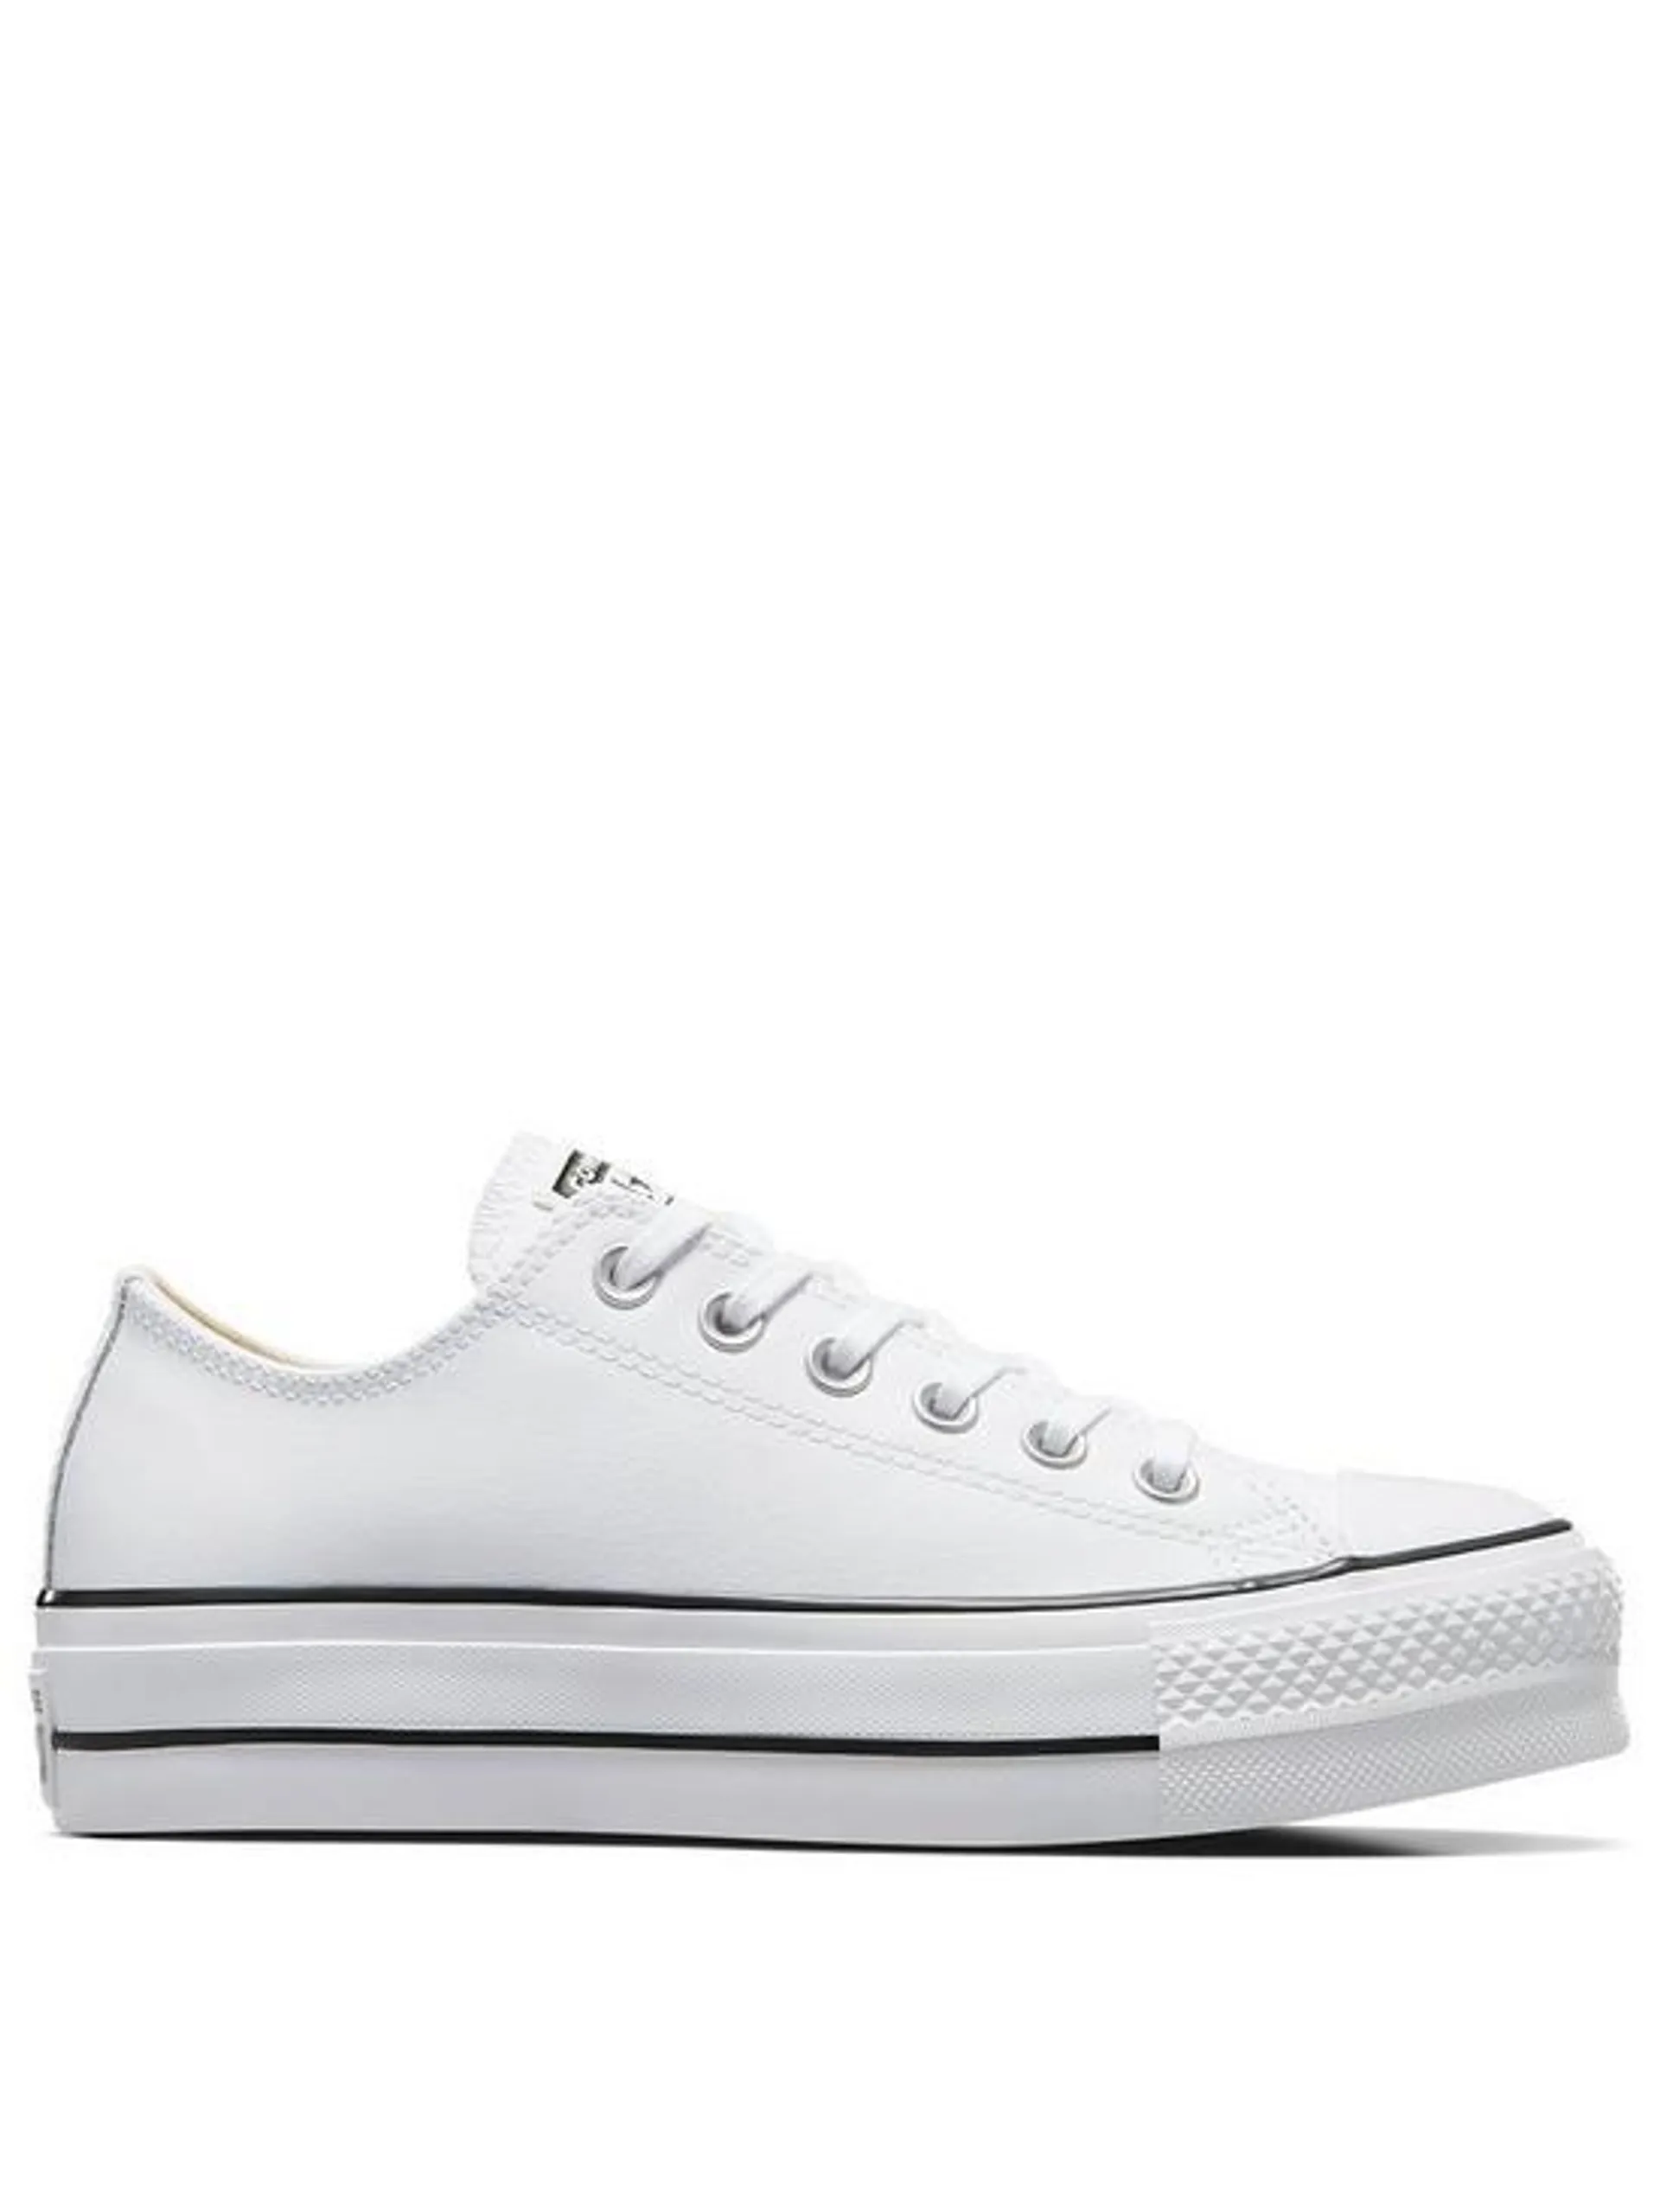 Womens Leather Lift Ox Trainers - White/Black